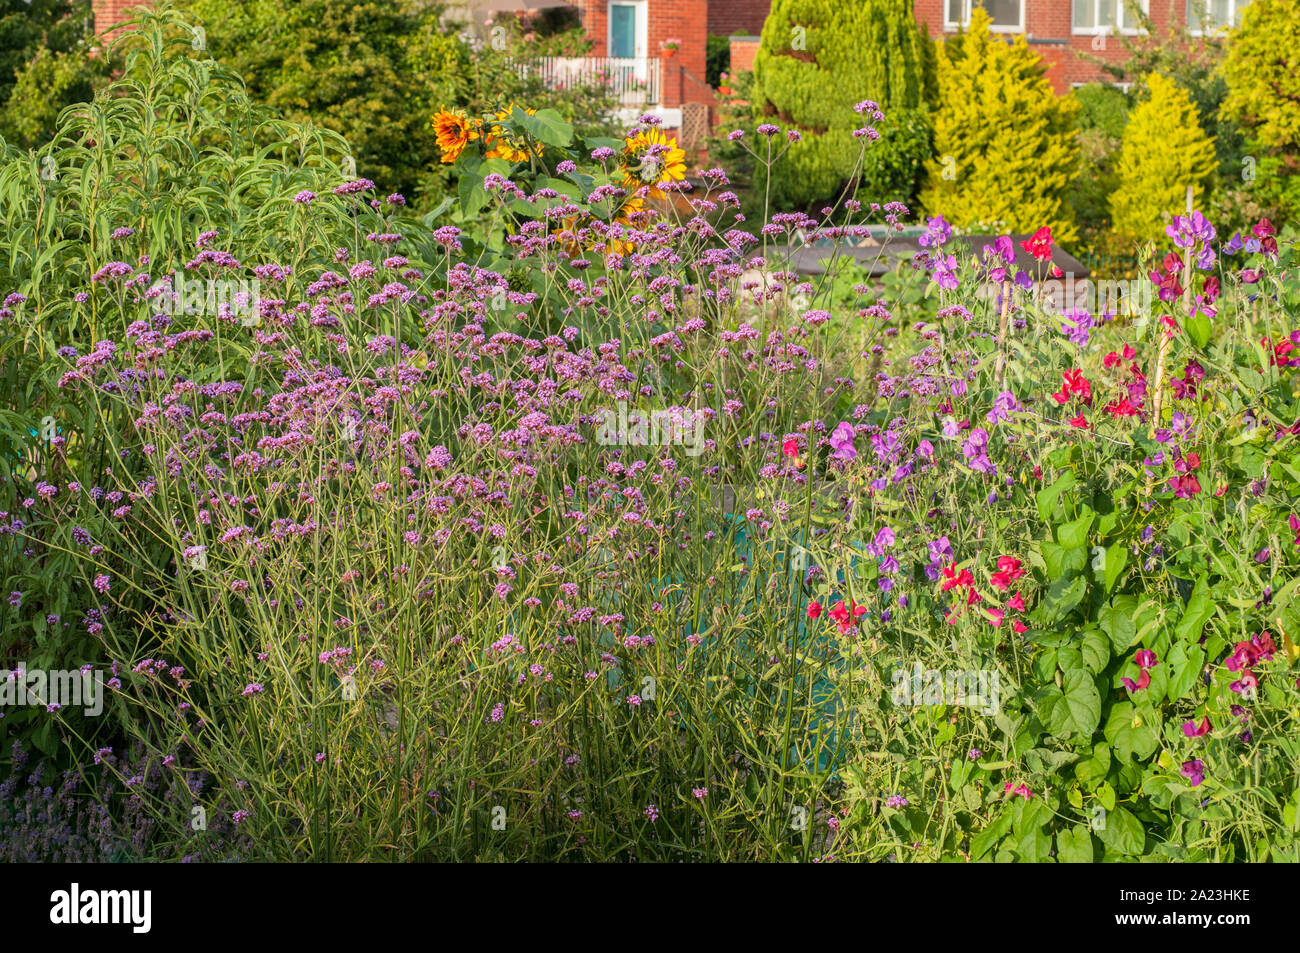 Verbena Bonariensis growing in a flower garden along with other flowers  This is a summer flowering diciduous perennial plant that is fully hardy Stock Photo